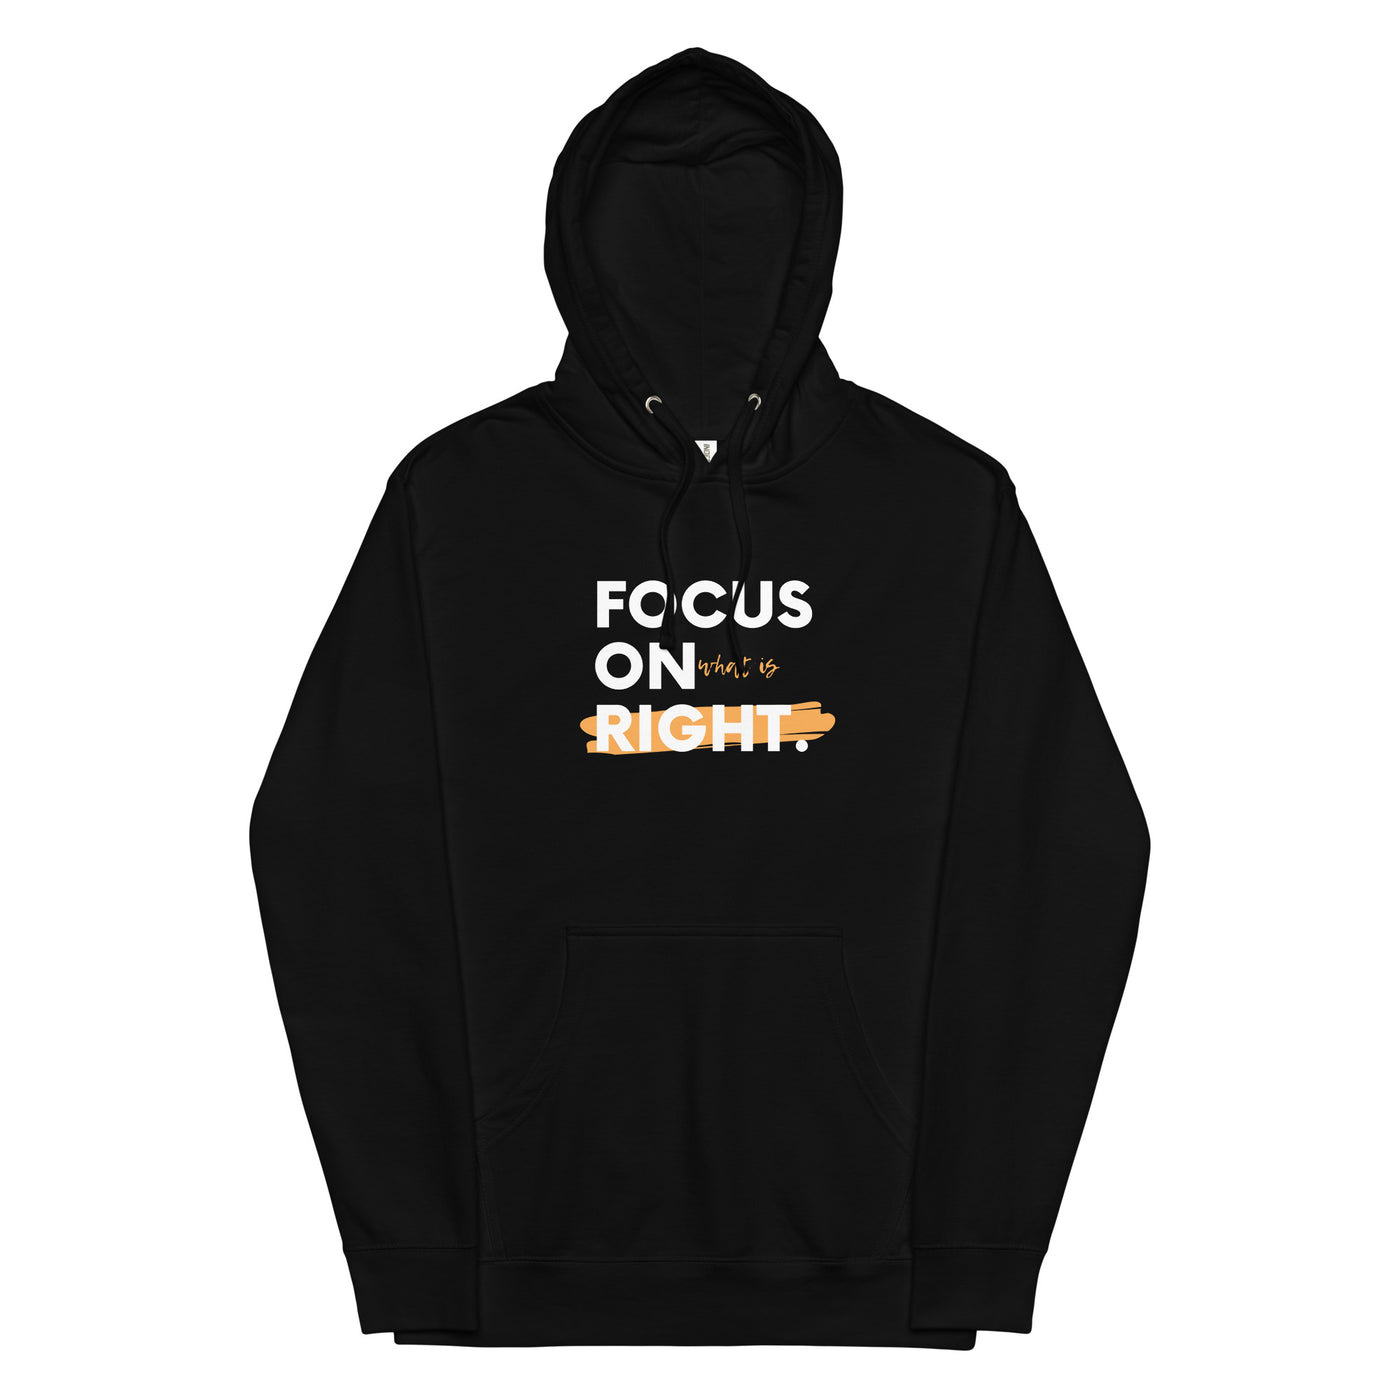 Women's Midweight Black Hoodie - Focus on Right